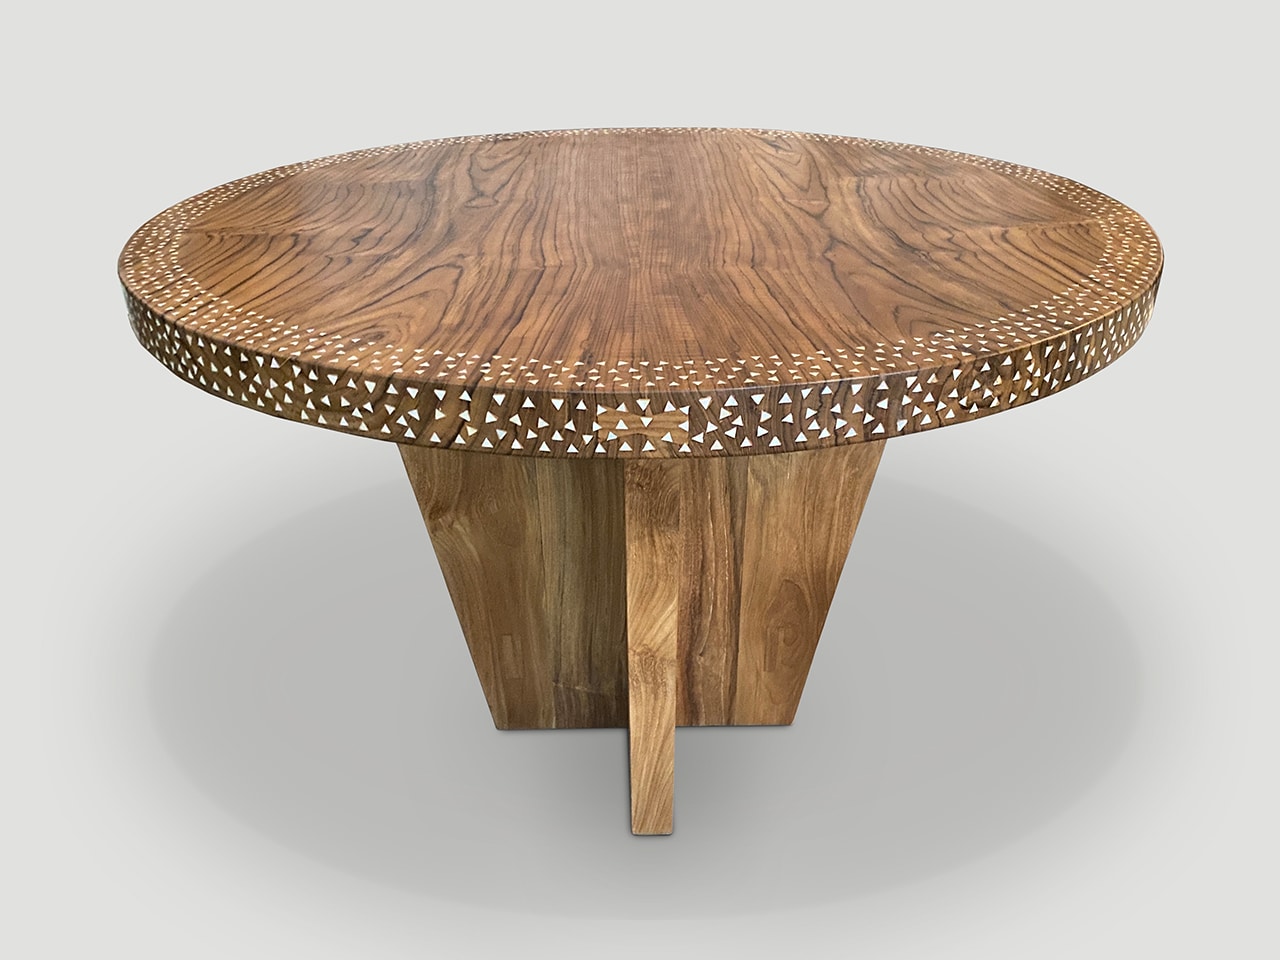 ROUND SHELL INLAID DINING TABLE OR ENTRANCE TABLE